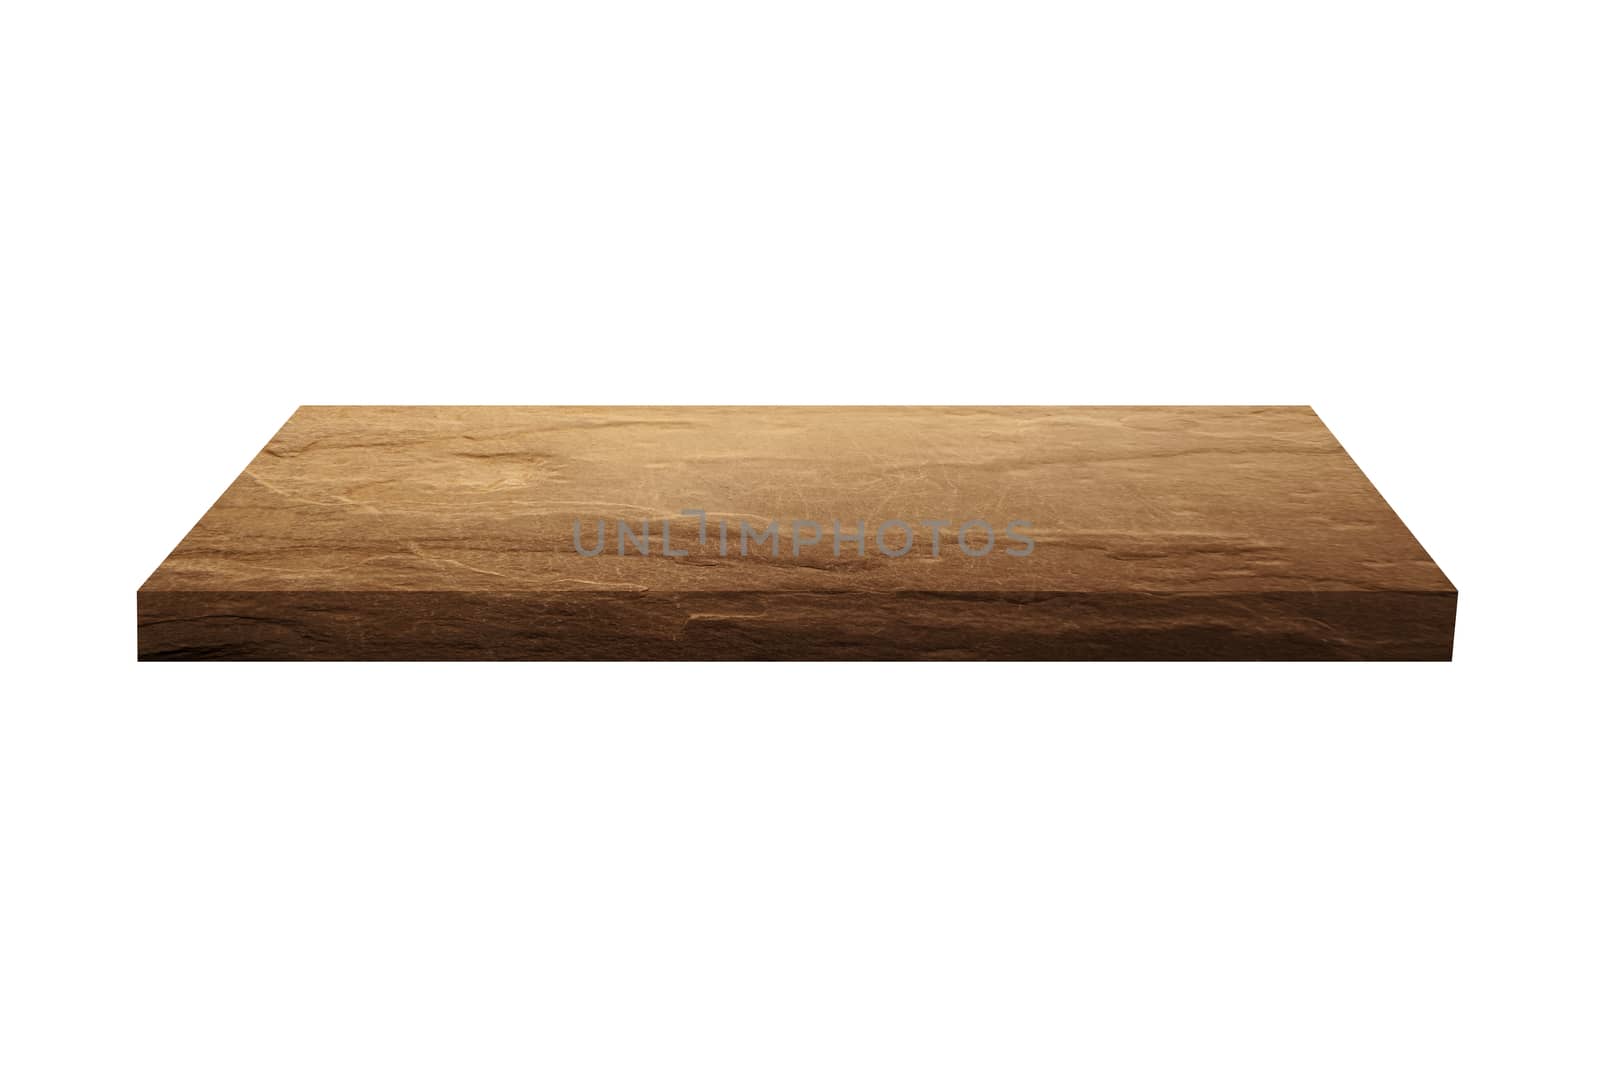 Sandstone shelf isolated on white background with clipping path.